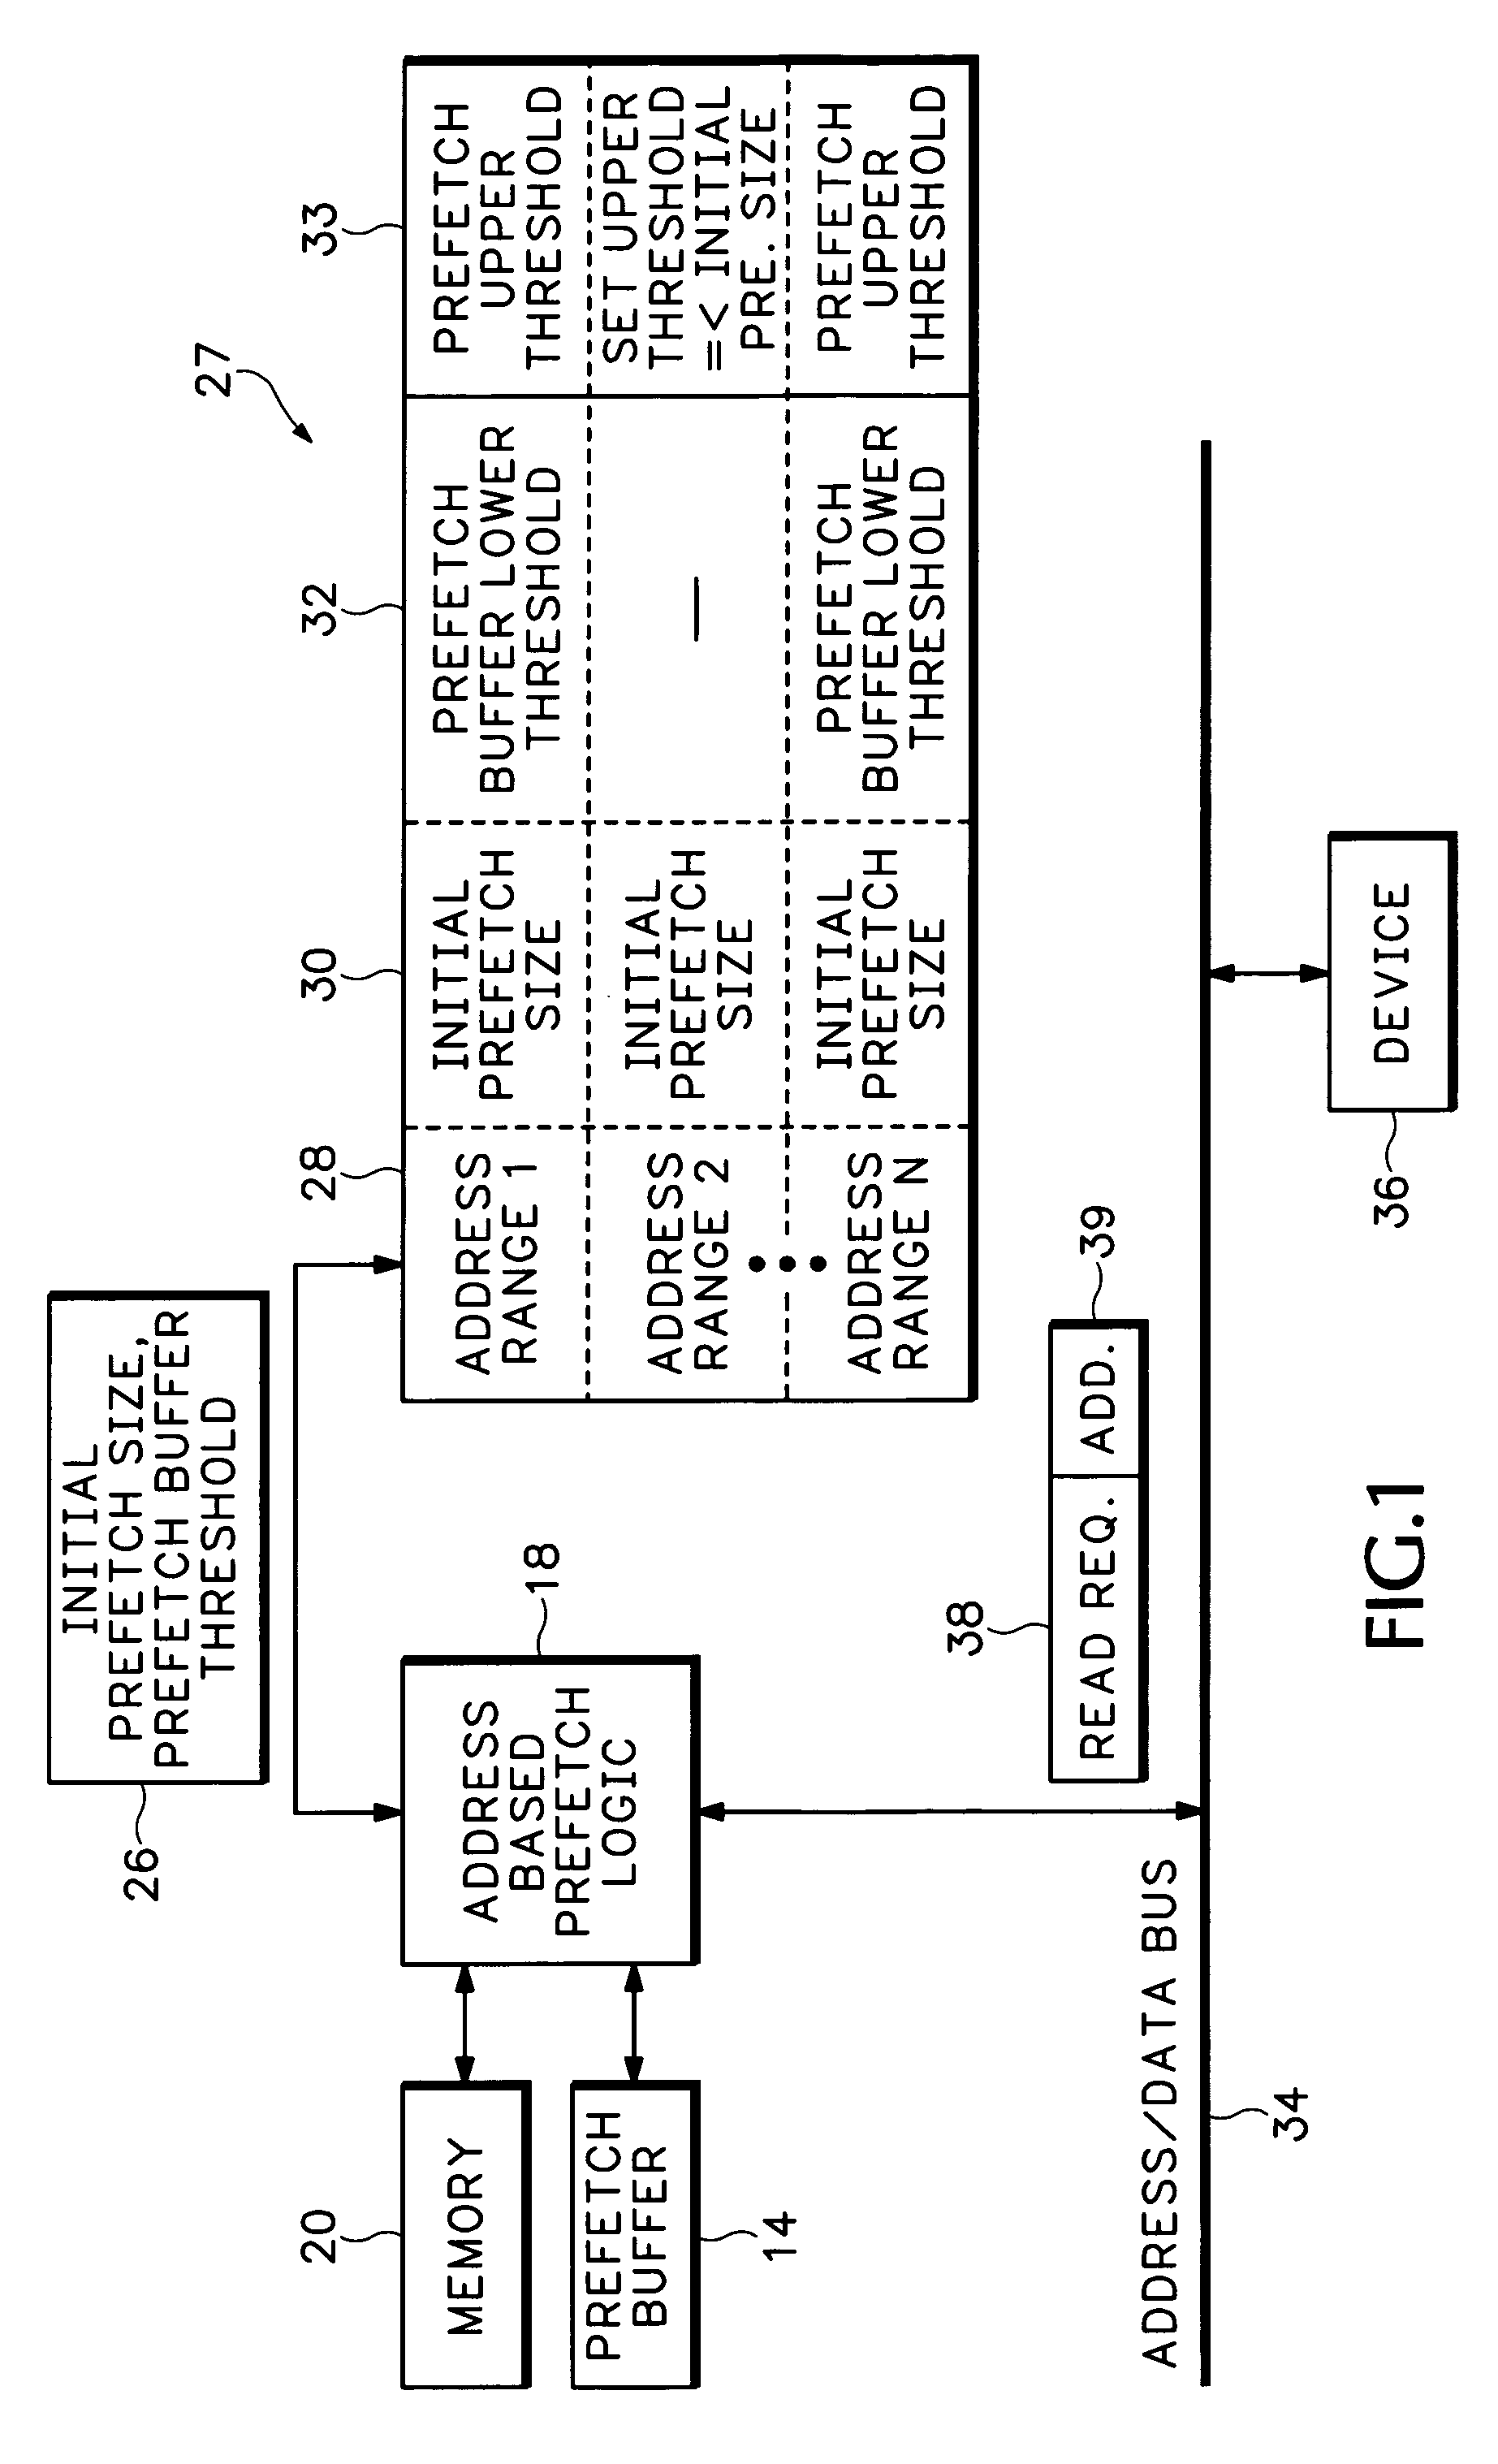 Method and apparatus for optimizing prefetching based on memory addresses